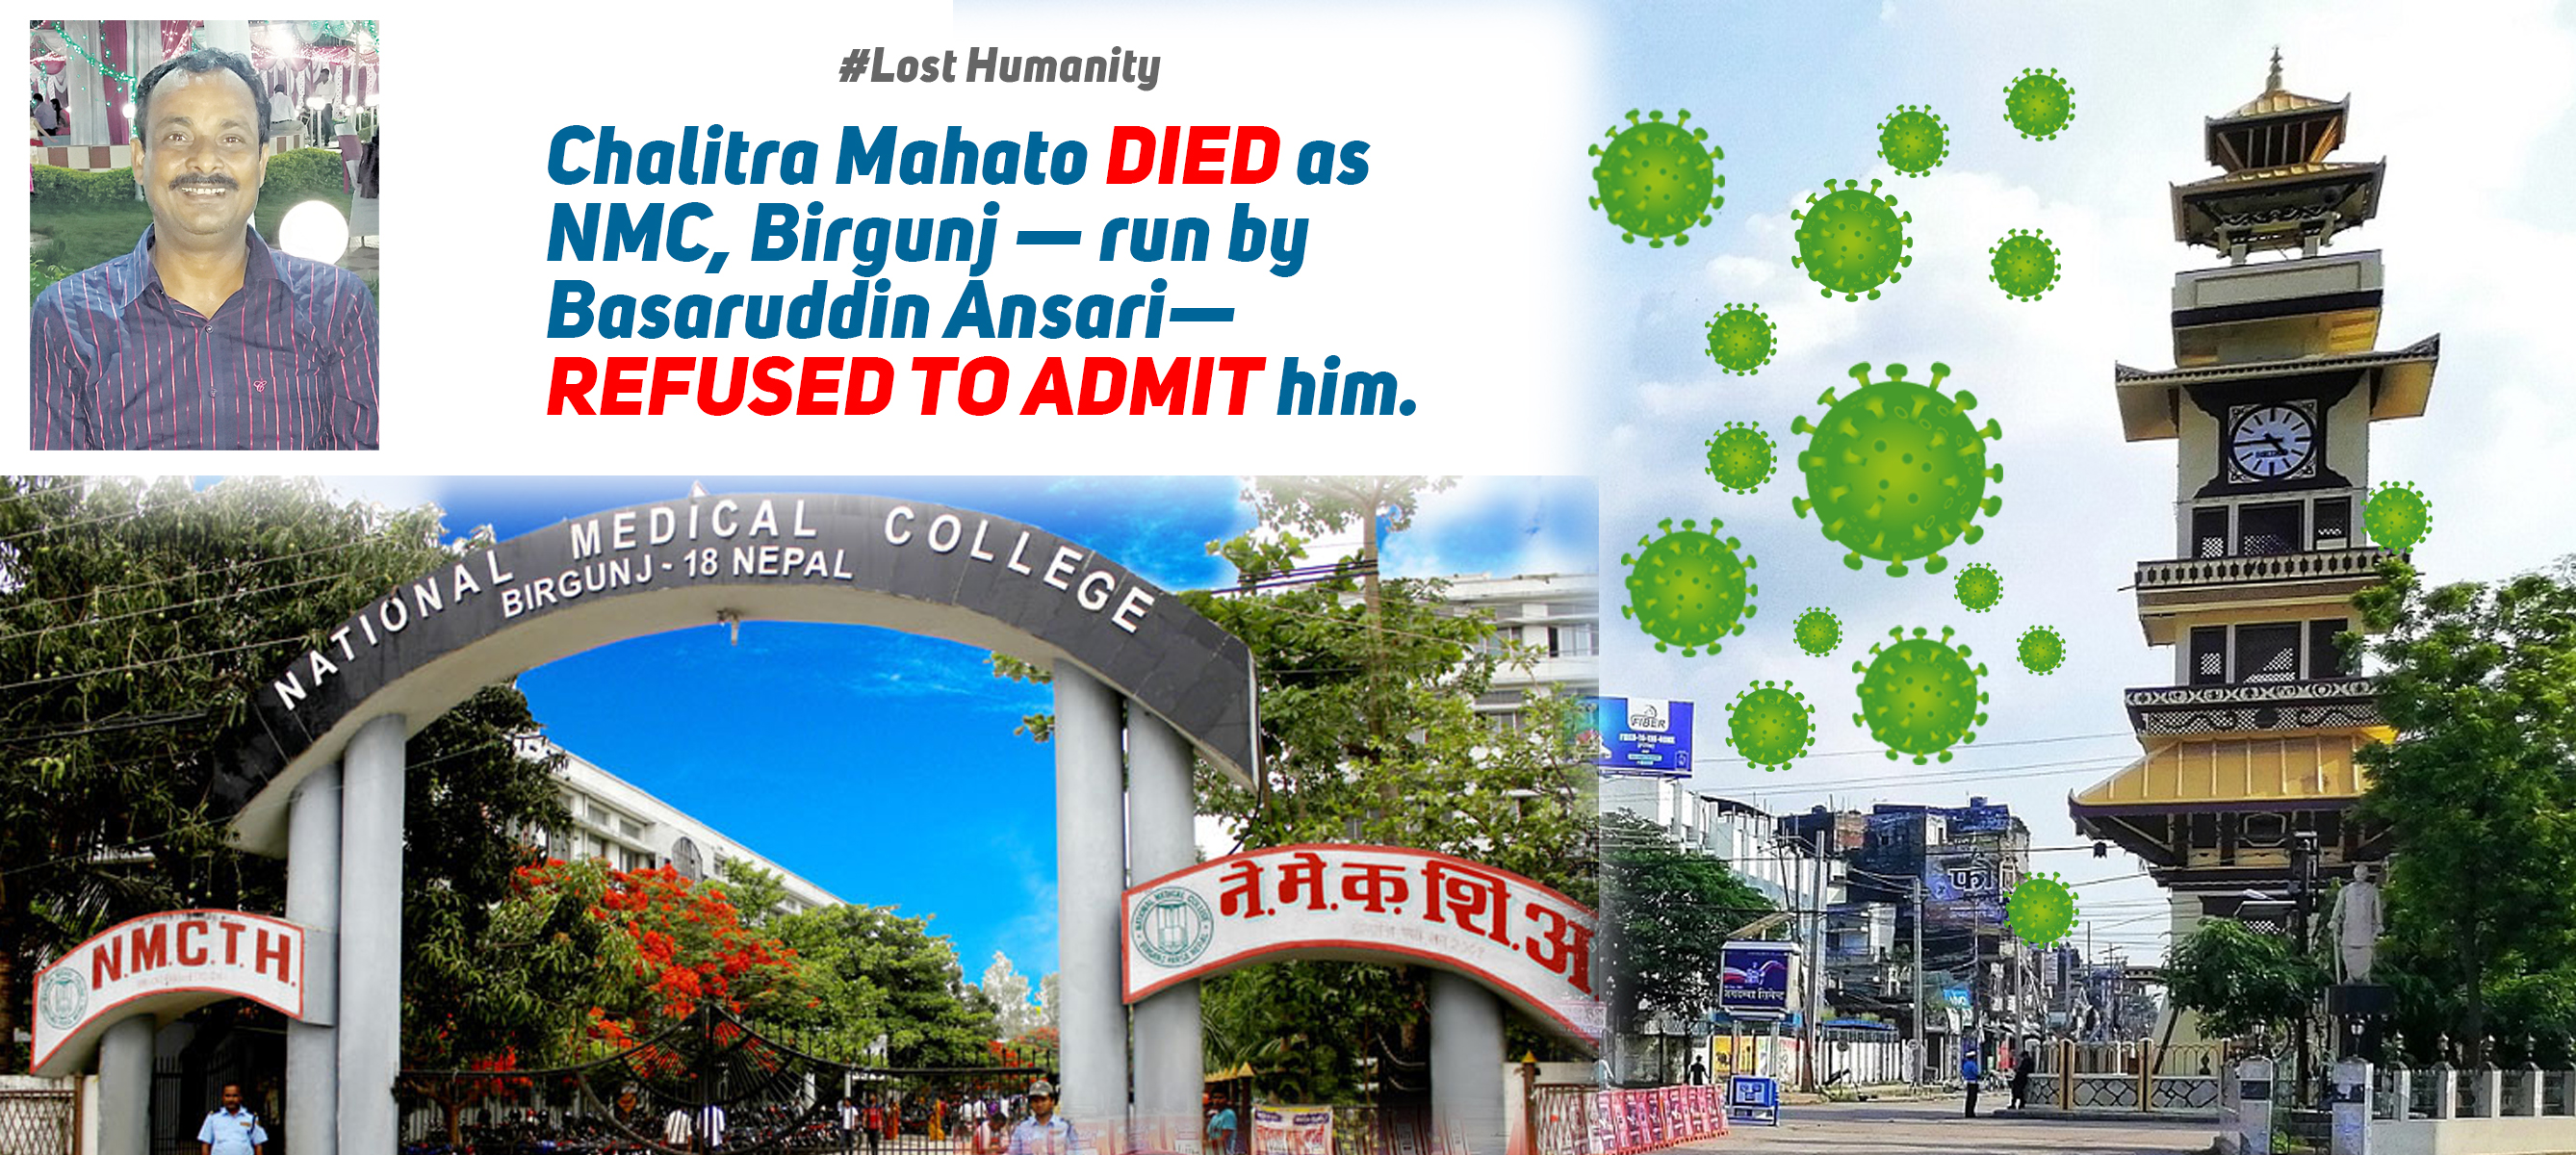 When NMC, Birgunj refused to admit Mahato, he died at the hospital gate